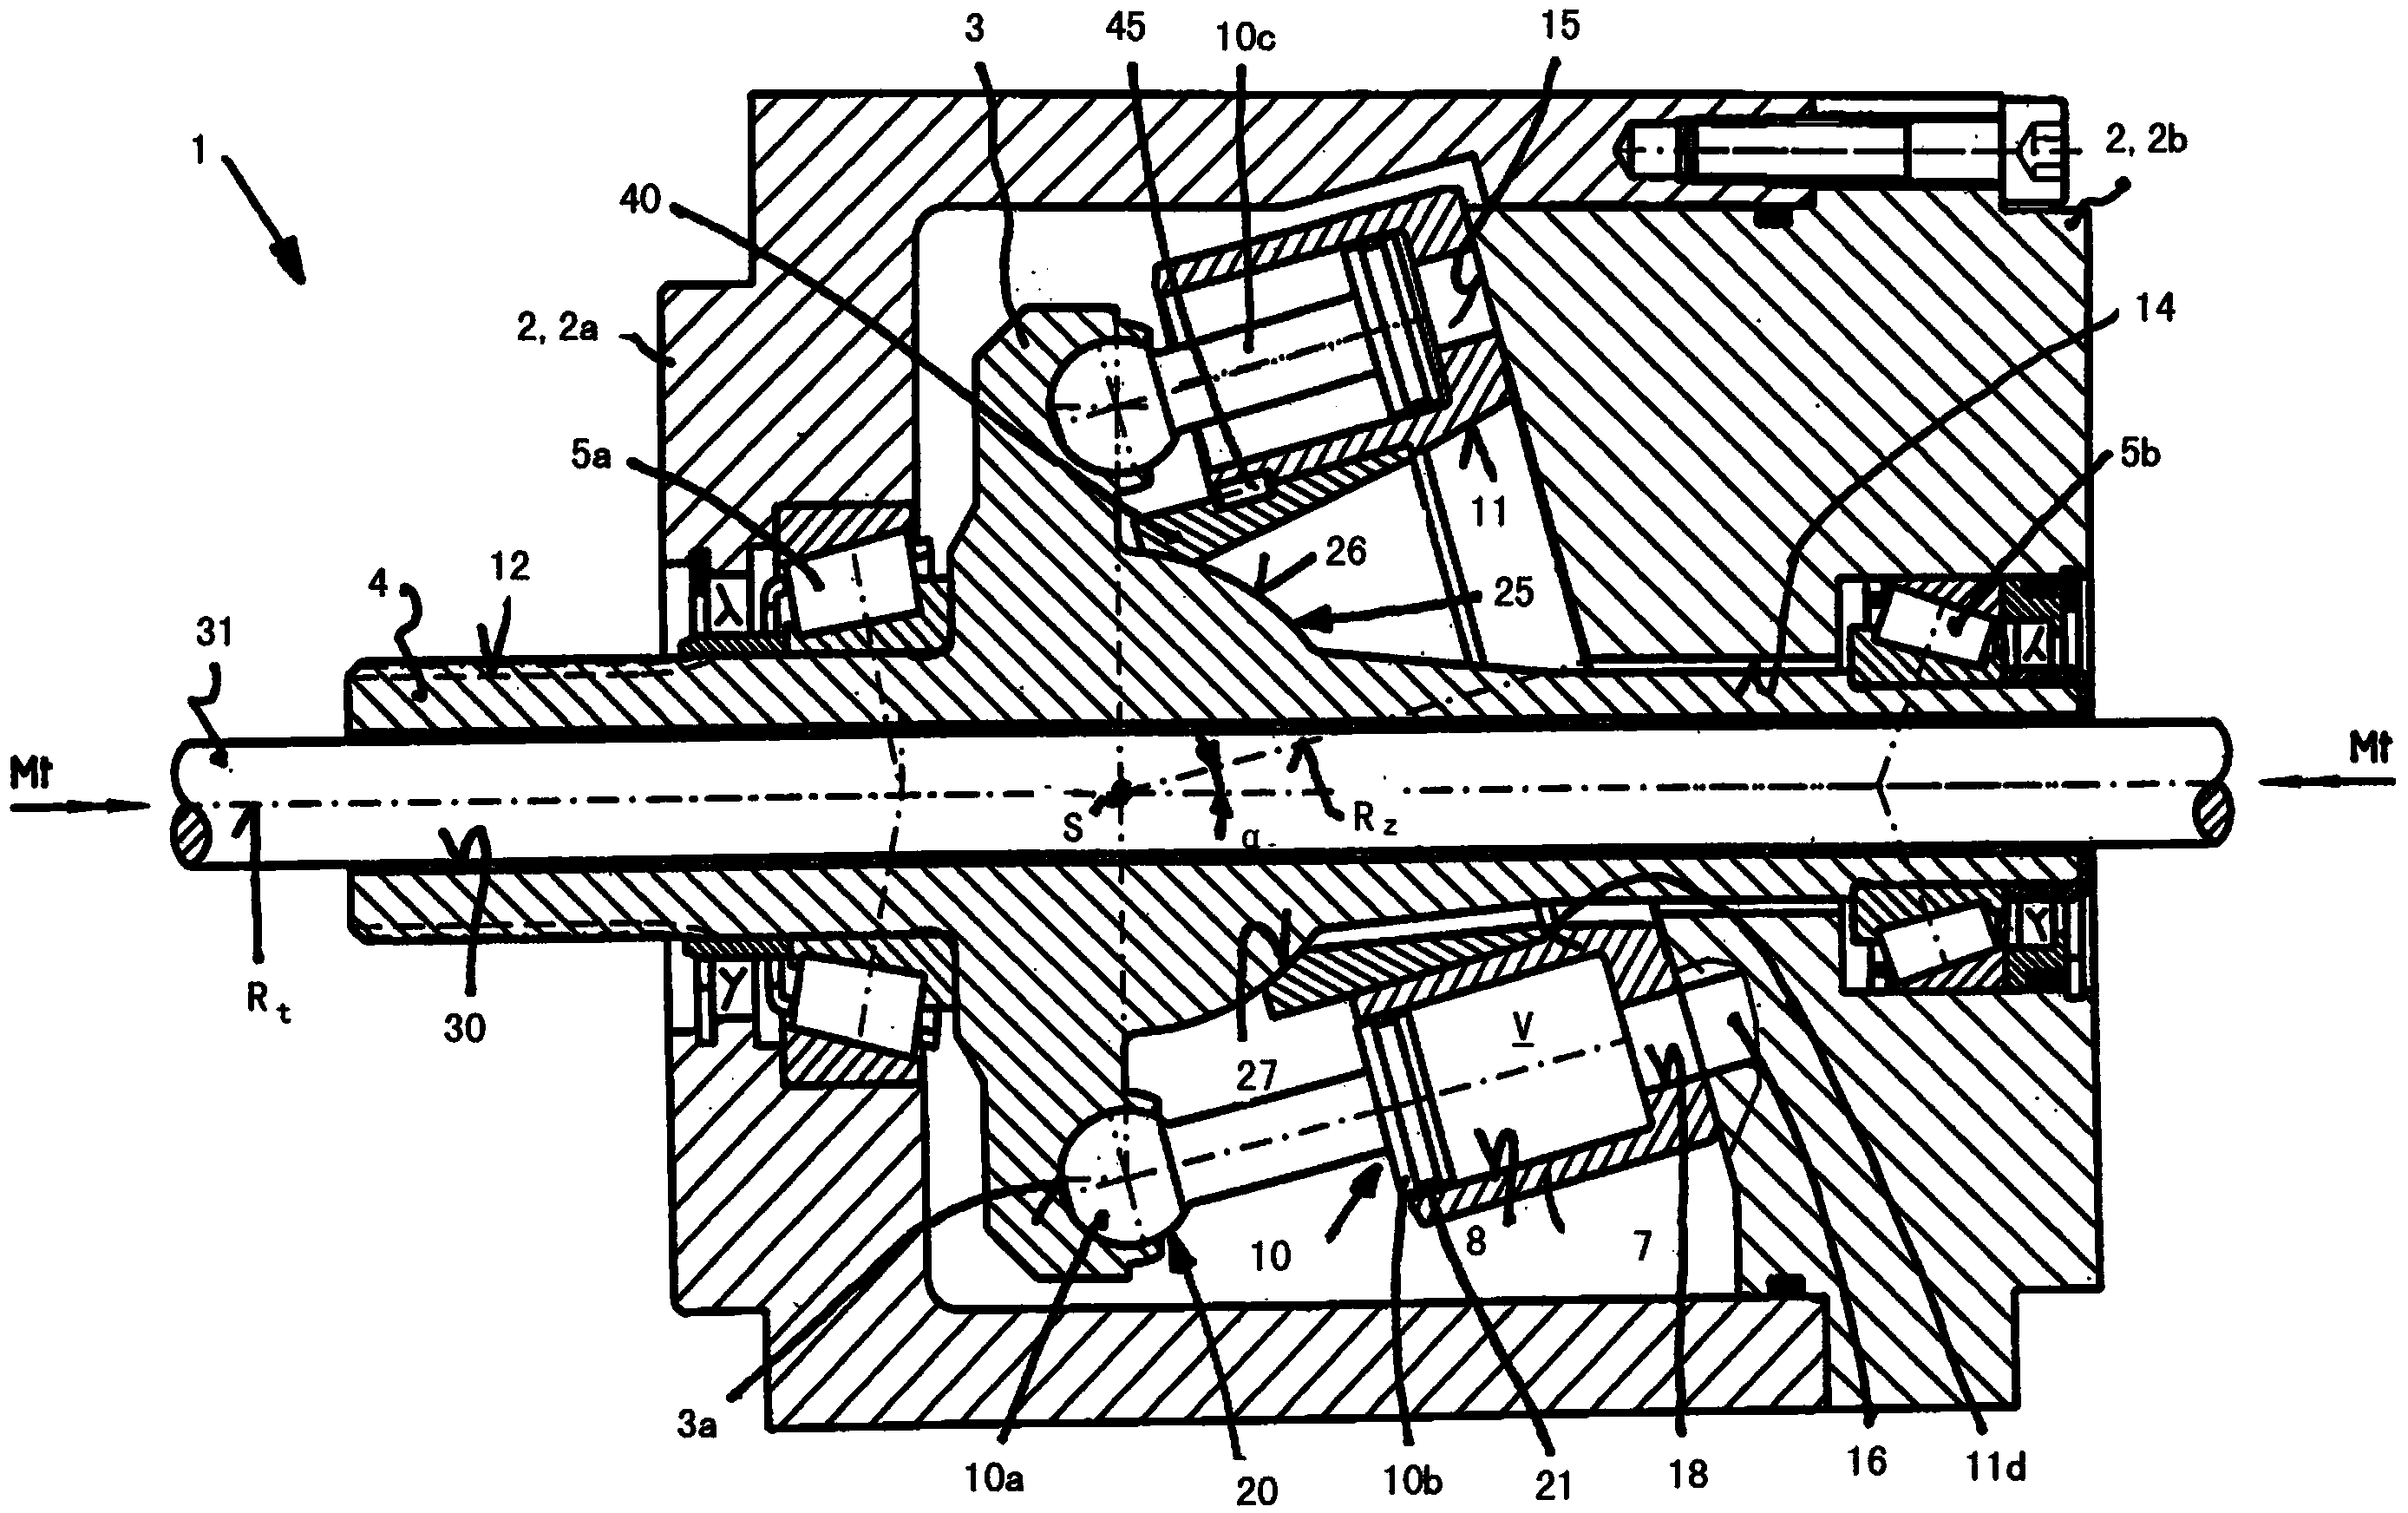 Hydrostatic axial piston machine utilizing a bent-axis construction